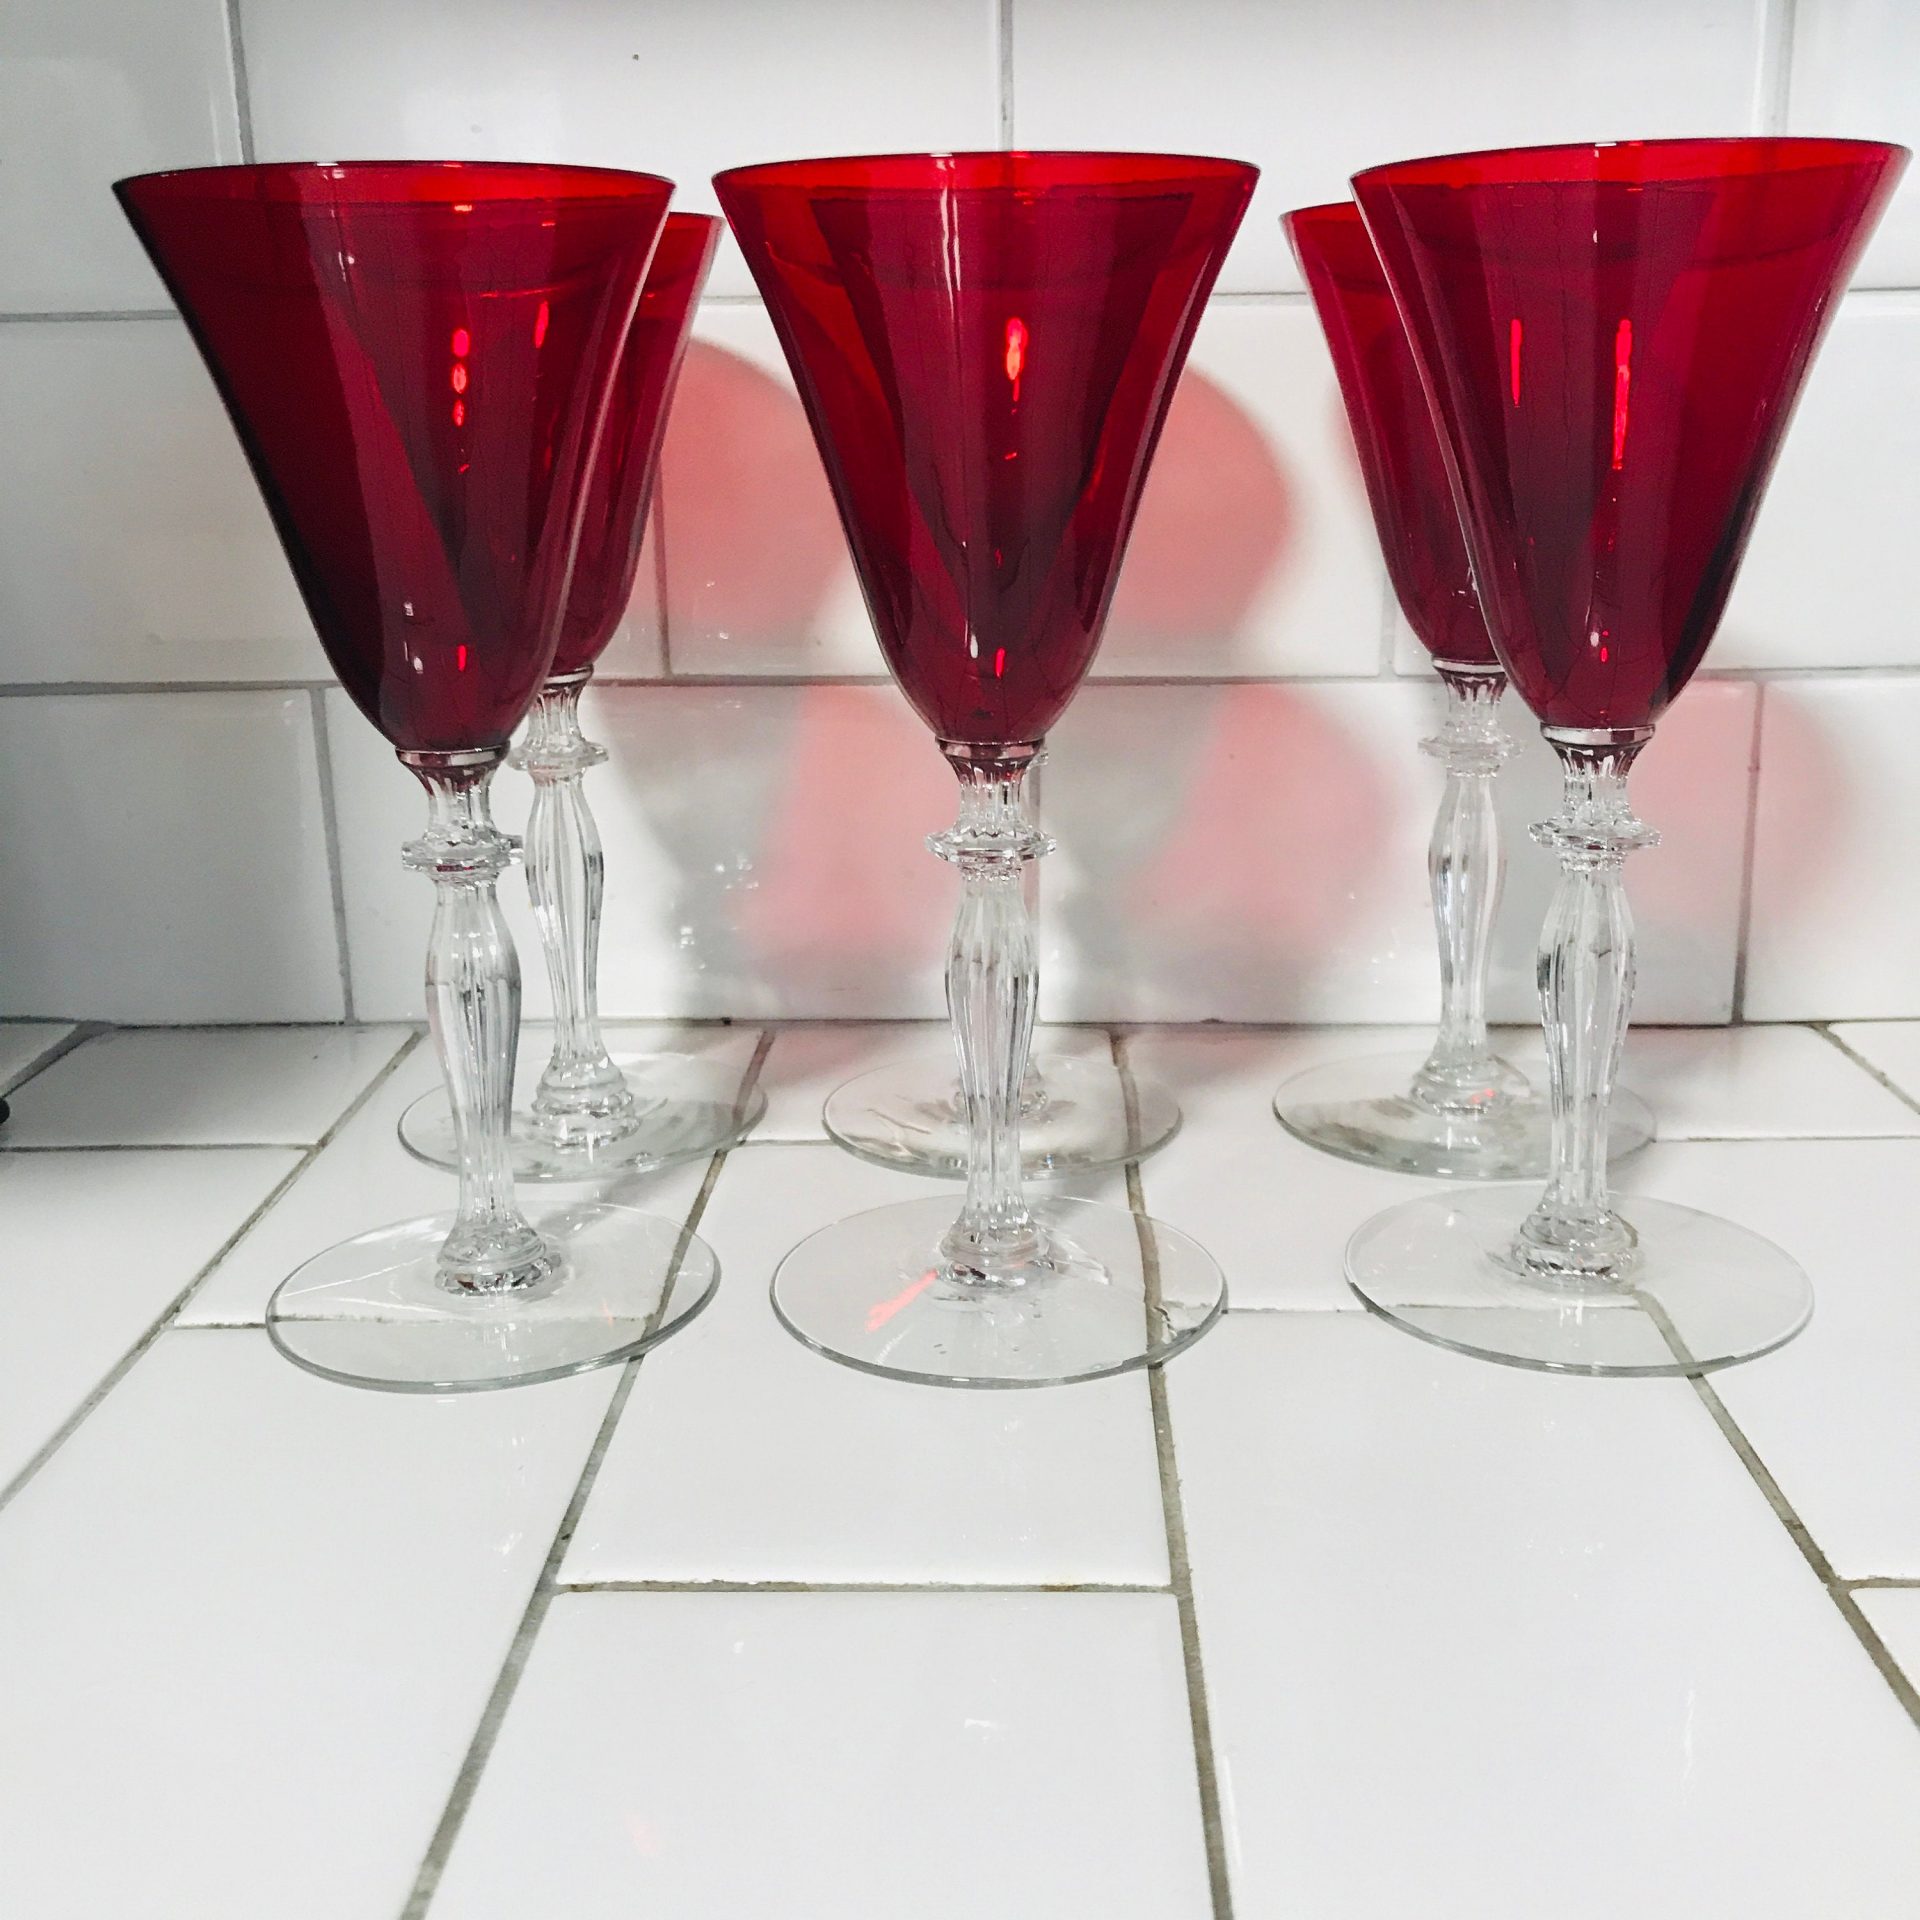 https://www.truevintageantiques.com/wp-content/uploads/2021/05/vintage-set-of-6-wine-glasses-red-with-clear-stems-fine-dining-elegant-dining-collectible-home-decor-display-glass-stemware-60992bd61-scaled.jpg